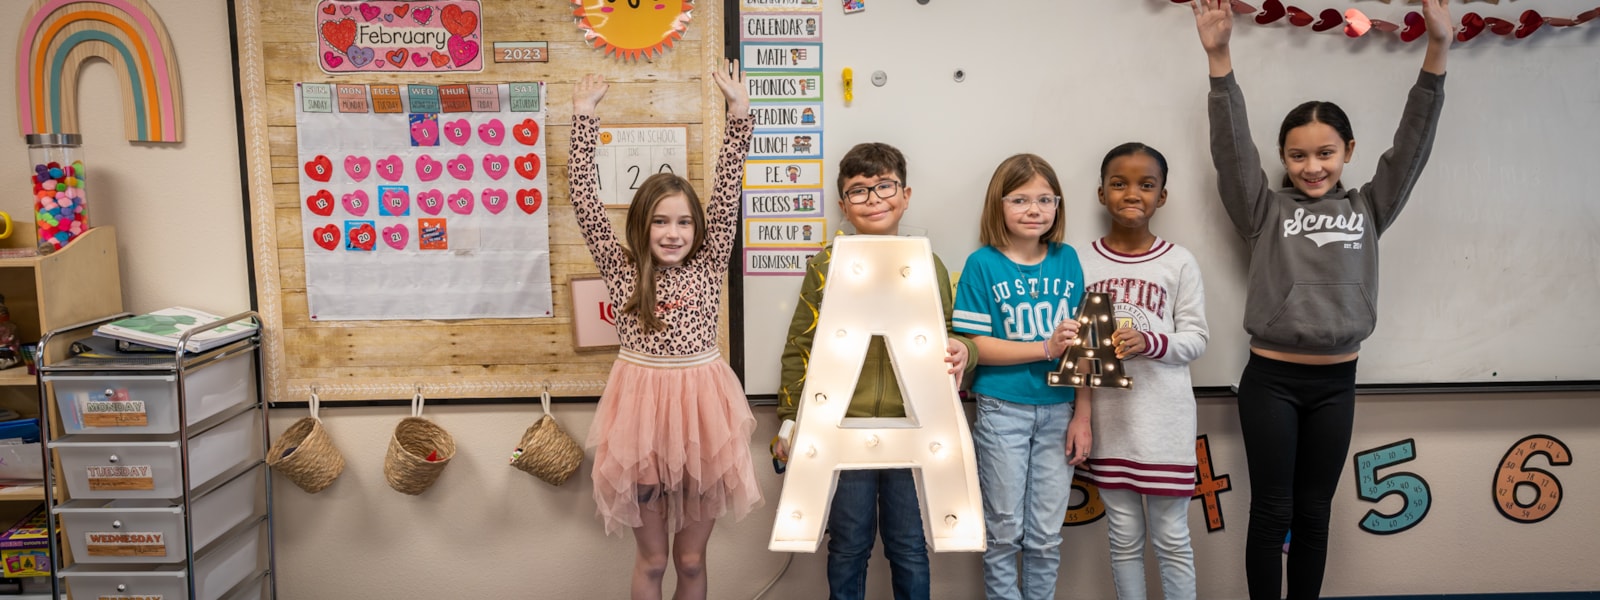 Students holding "A" to celebrate 